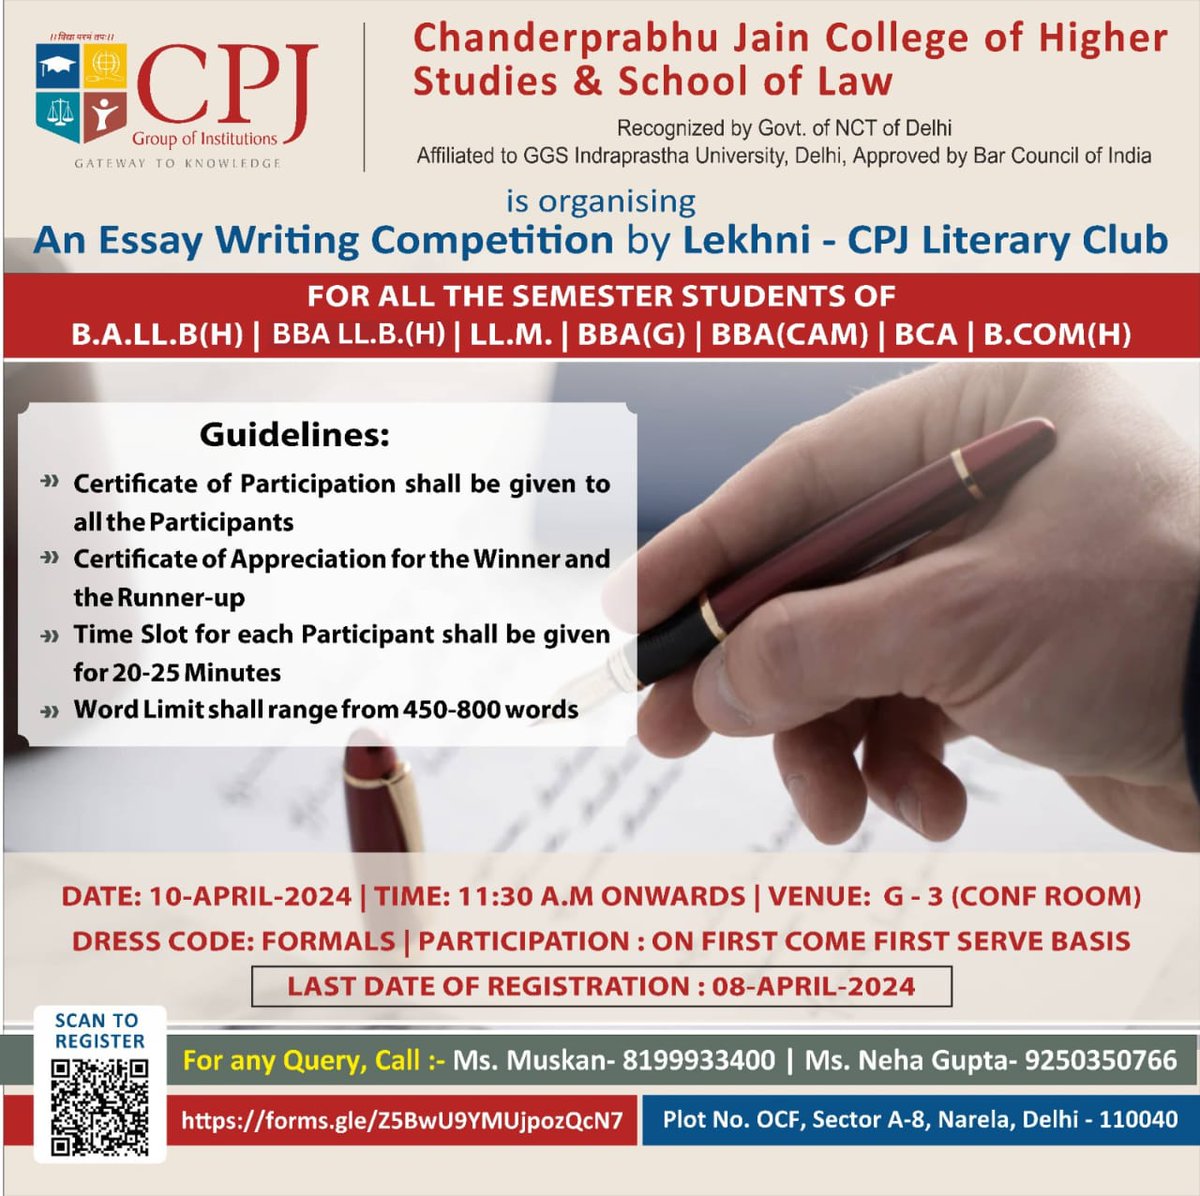 📢 Exciting News! 📝

✨ Join us at CPJ College for an enriching Essay Writing Competition organized by Lekhni - CPJ Literary Club! 

🎓✍️ Calling all Semester Students of B.A.LL.B(H), BBA LL.B(H), LL.M., BBA(G), BCA, BBA(CAM), B.COM(H) !

#EssayCompetition